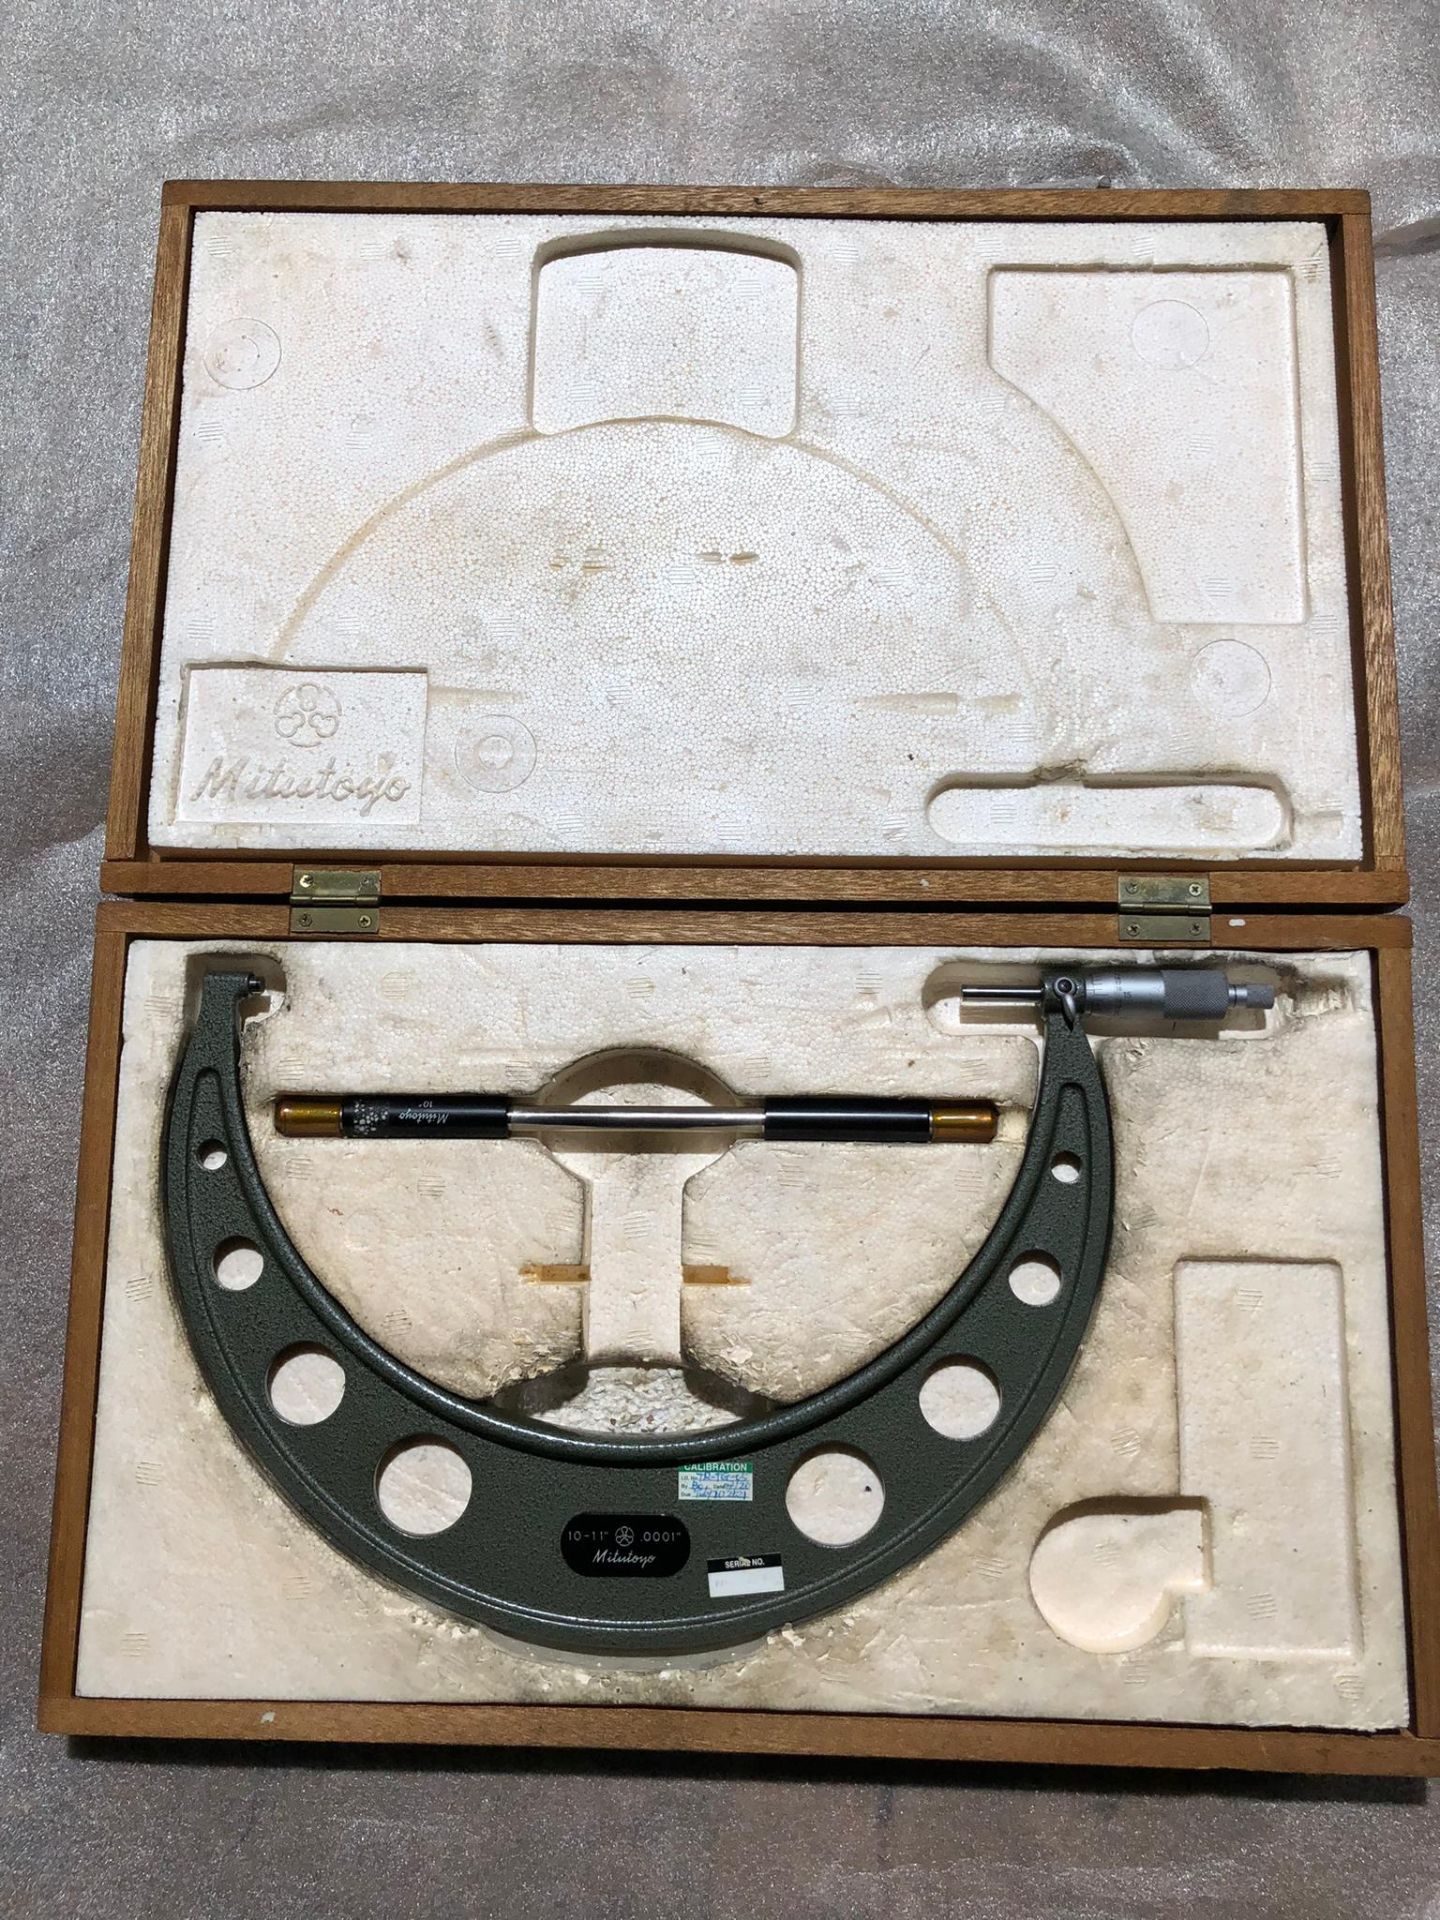 Mitutoyo 10-11" Micrometer in case with standard